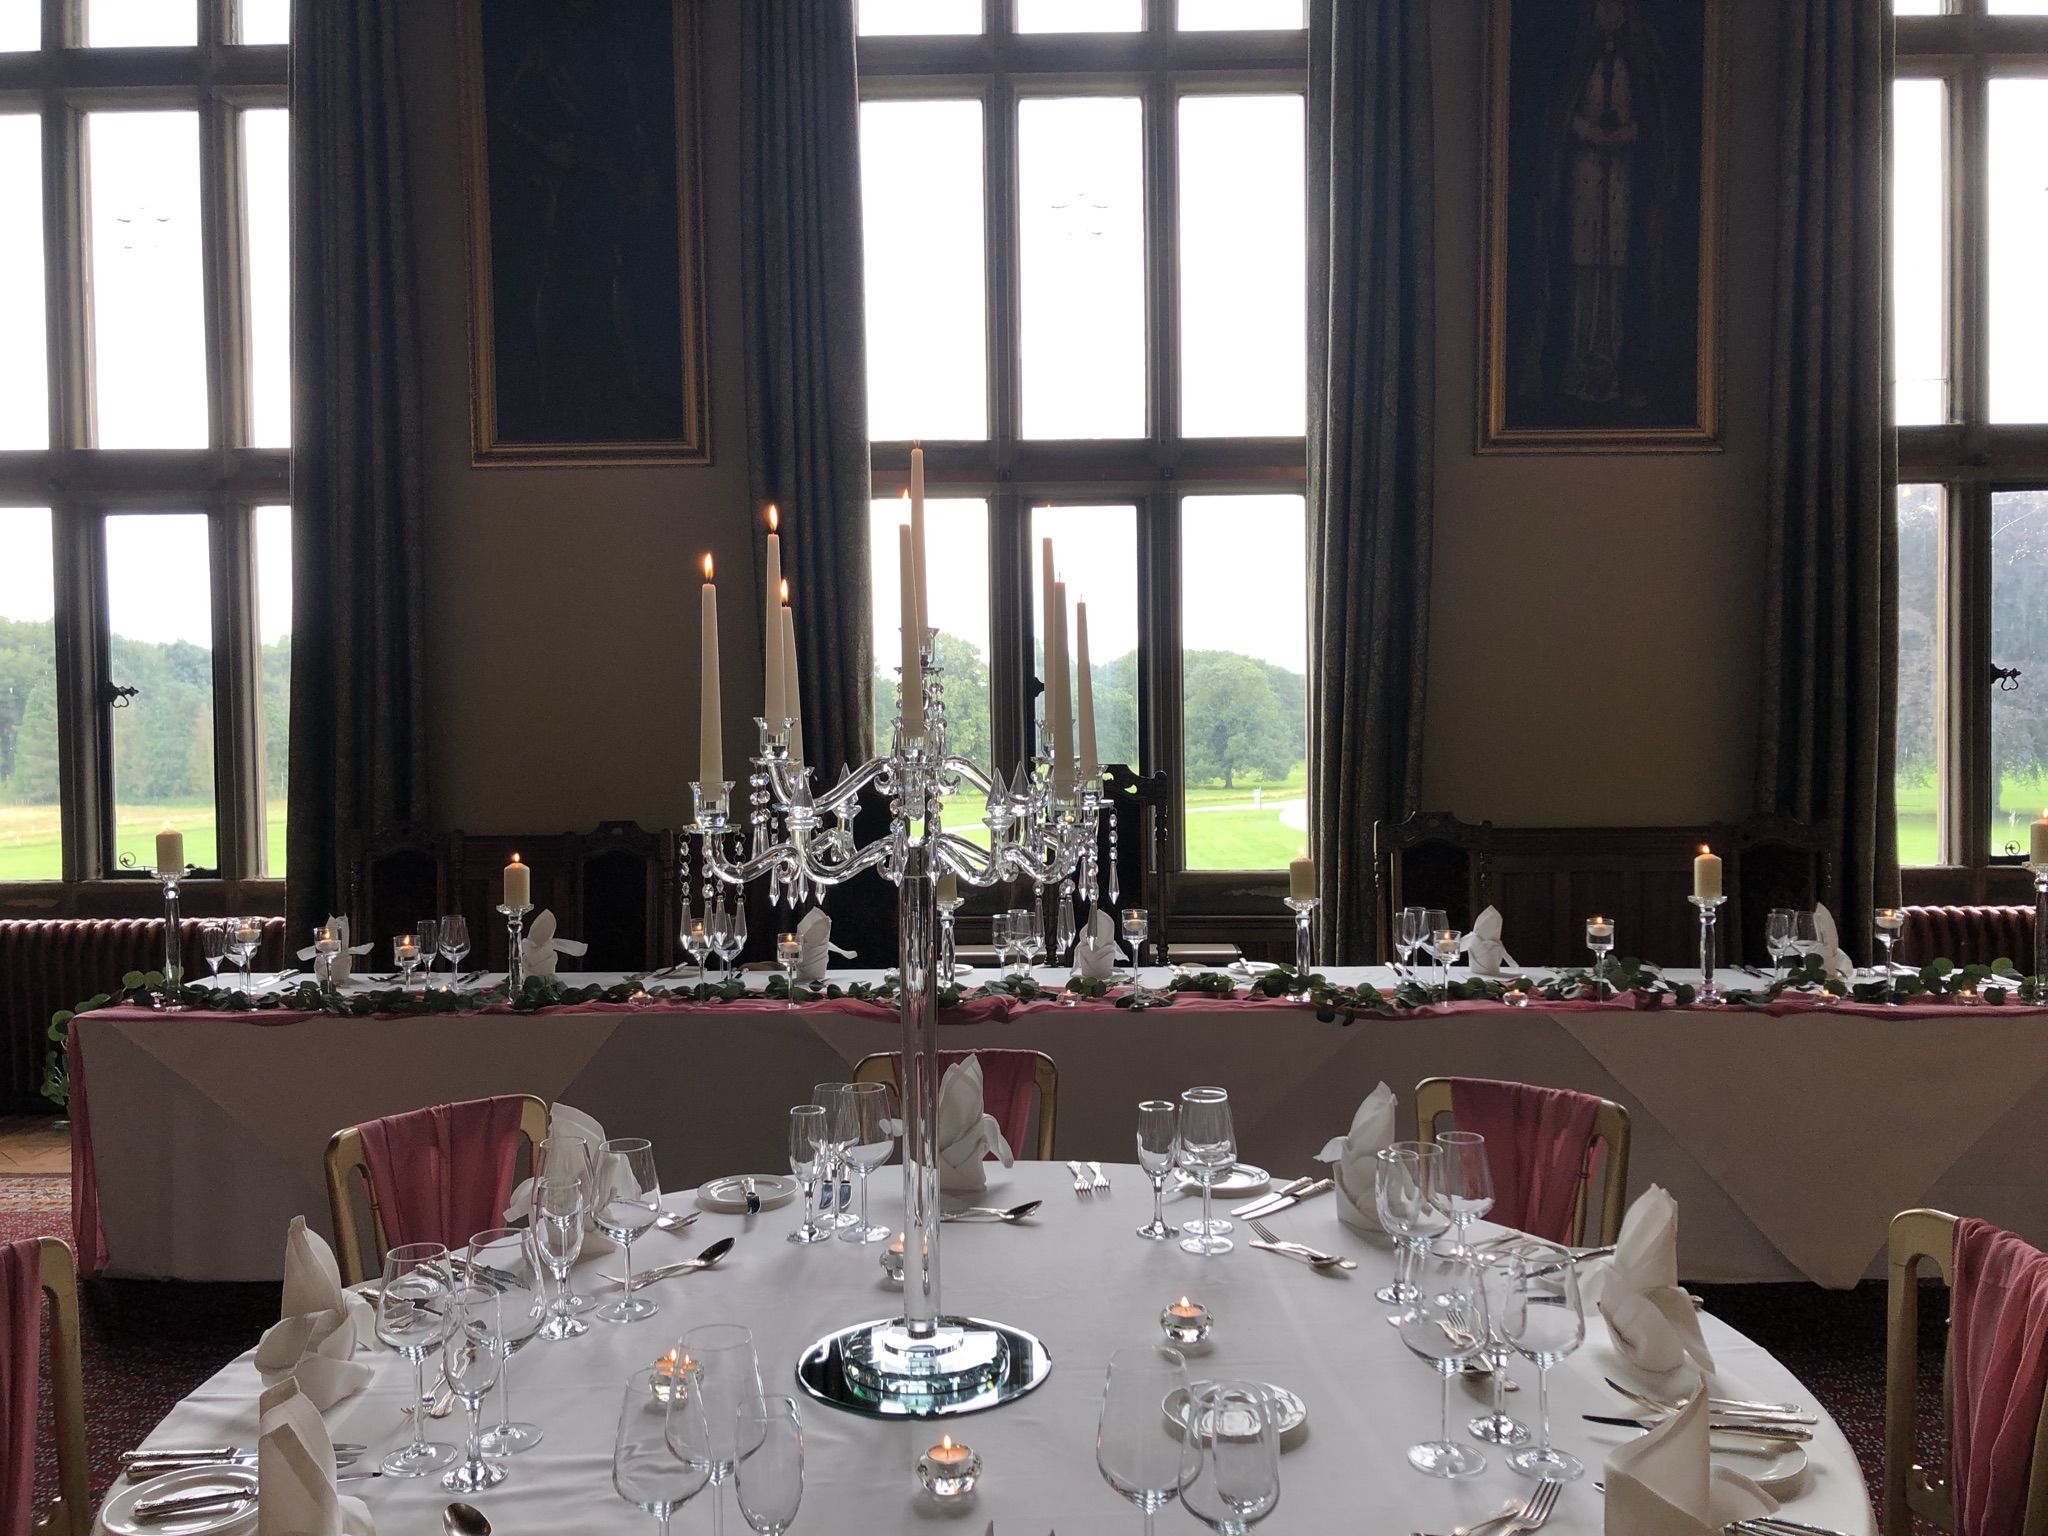 a table set for a formal dinner in front of large windows.